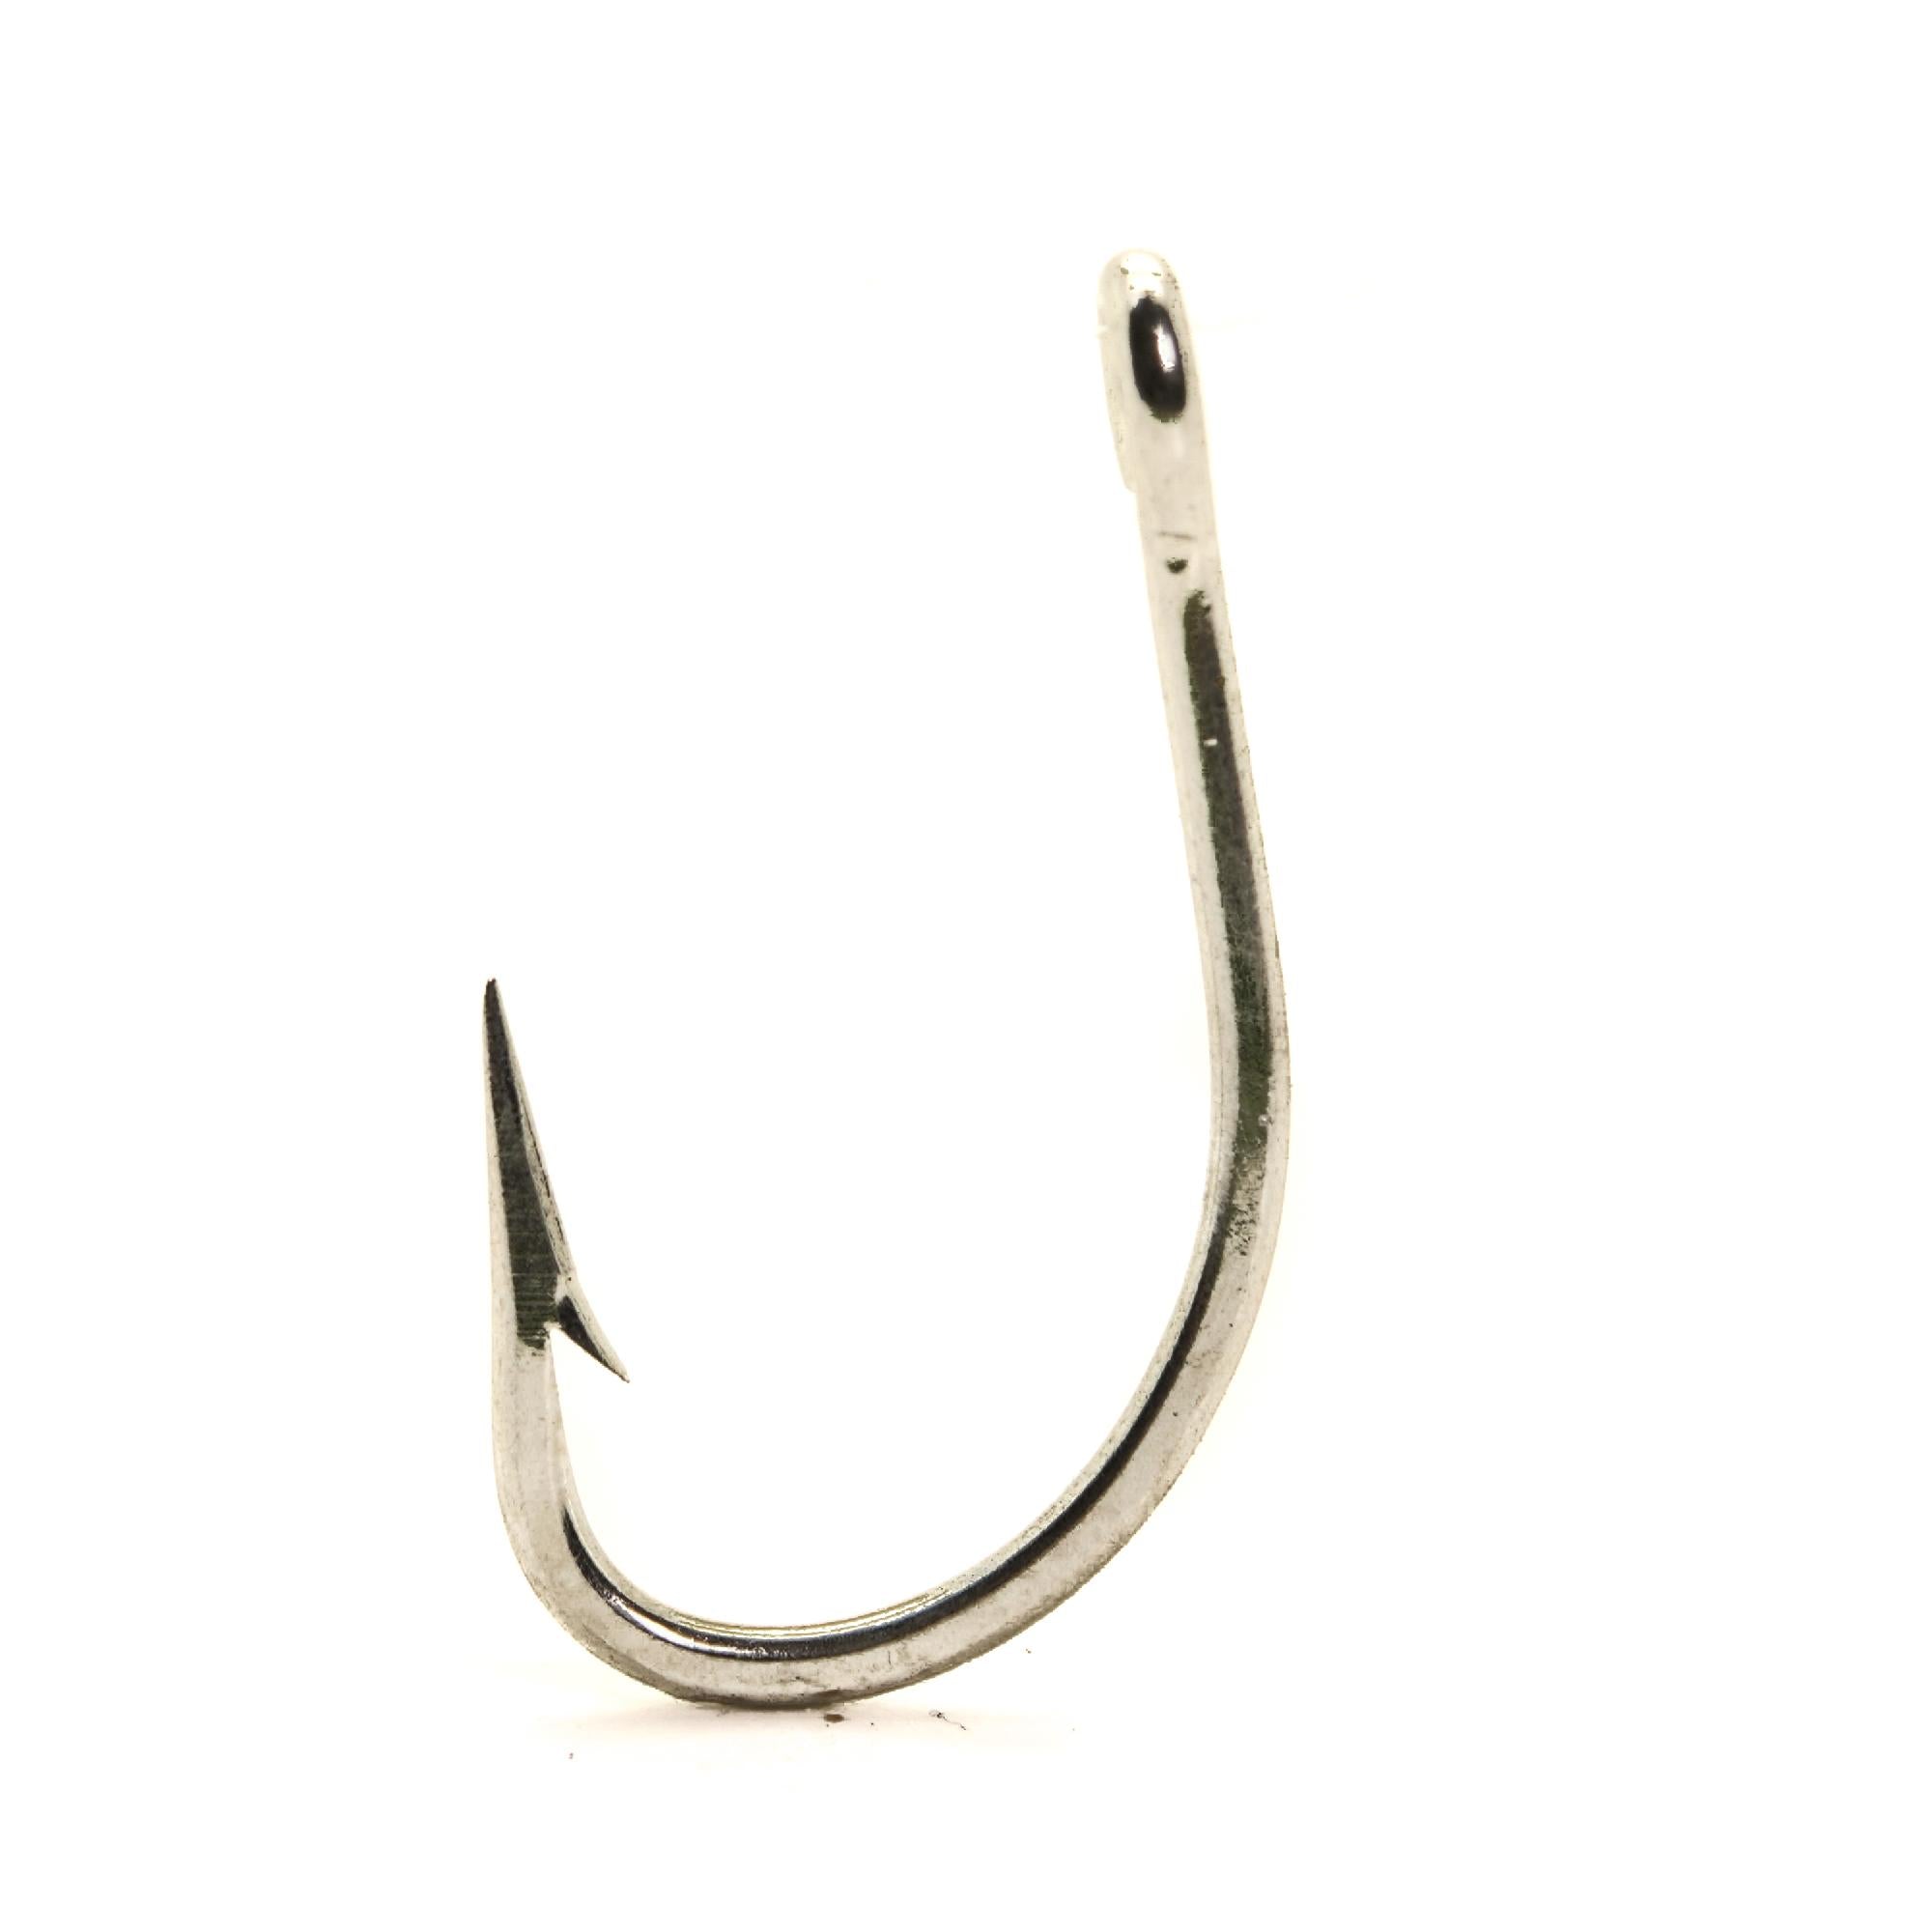 Mustad O'Shaughnessy Live Bait Hook, Size 4/0